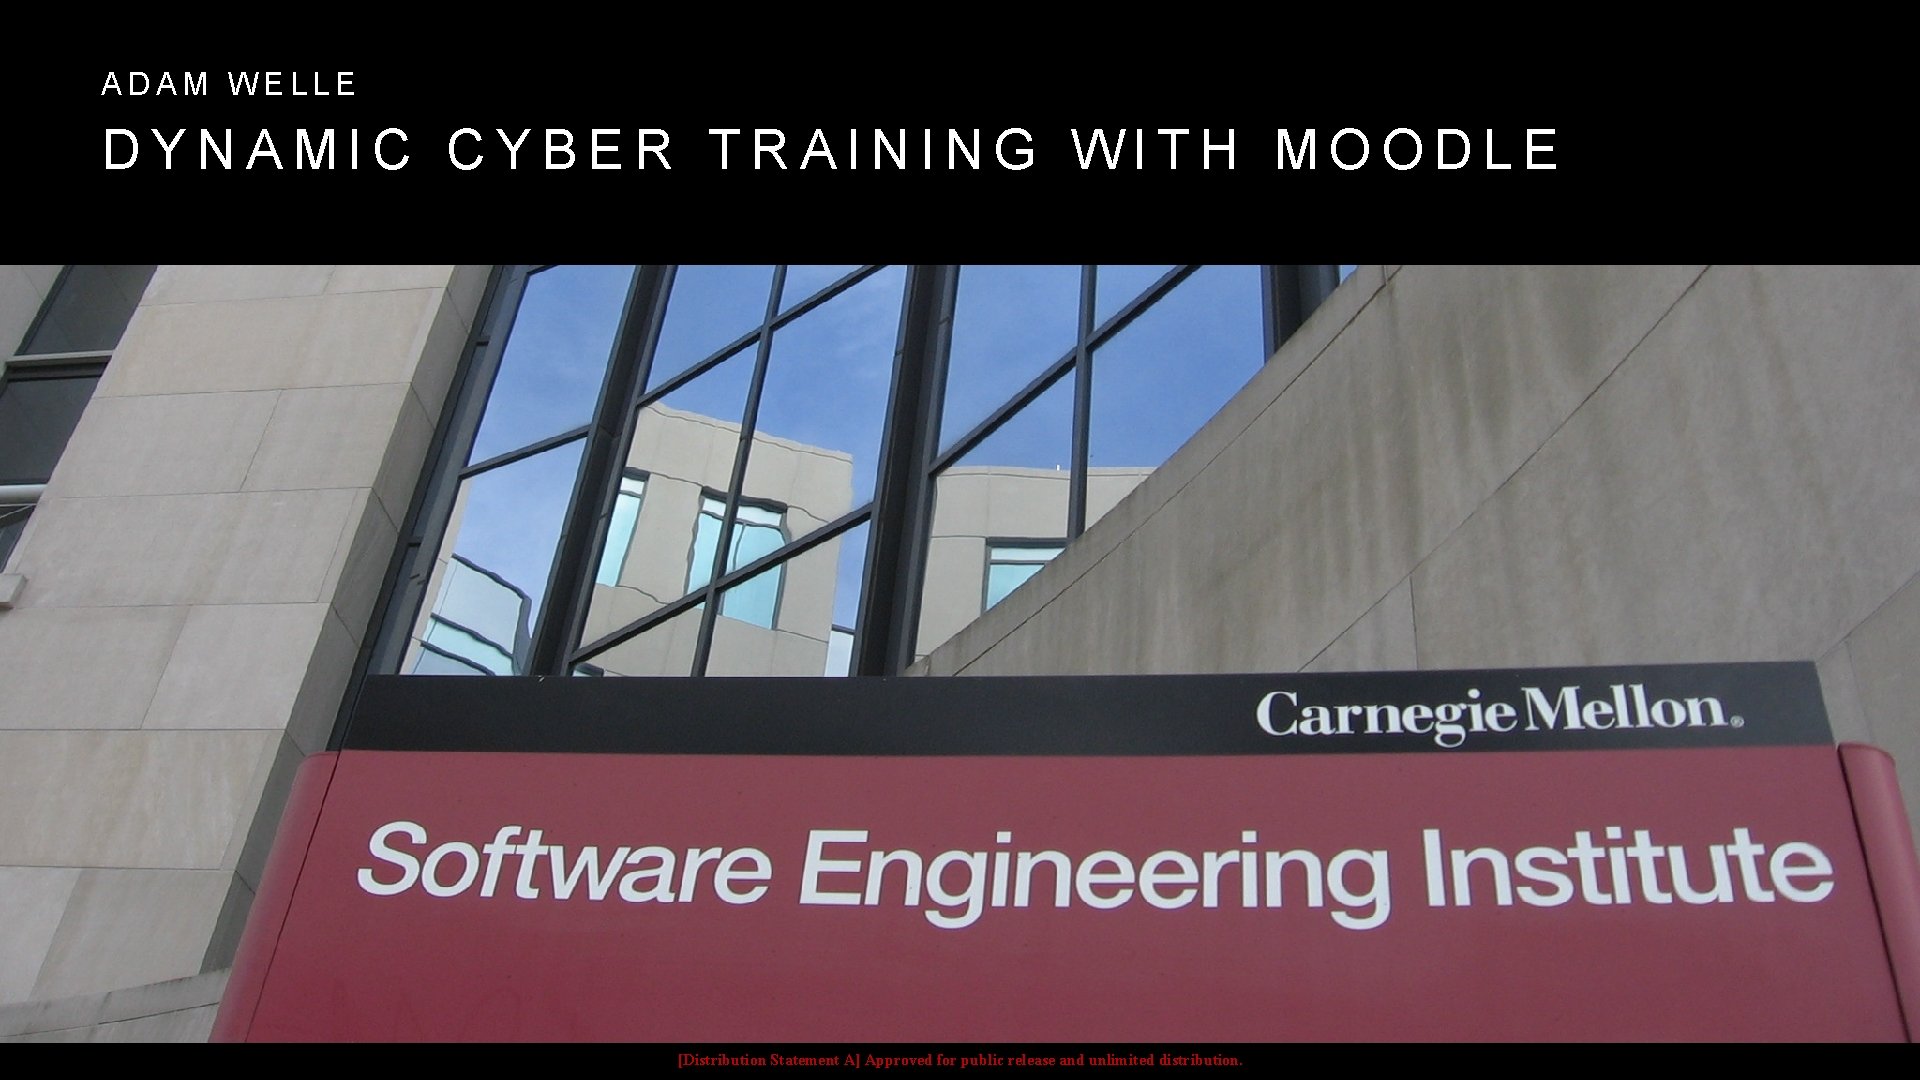 ADAM WELLE DYNAMIC CYBER TRAINING WITH MOODLE [Distribution Statement A] Approved for public release